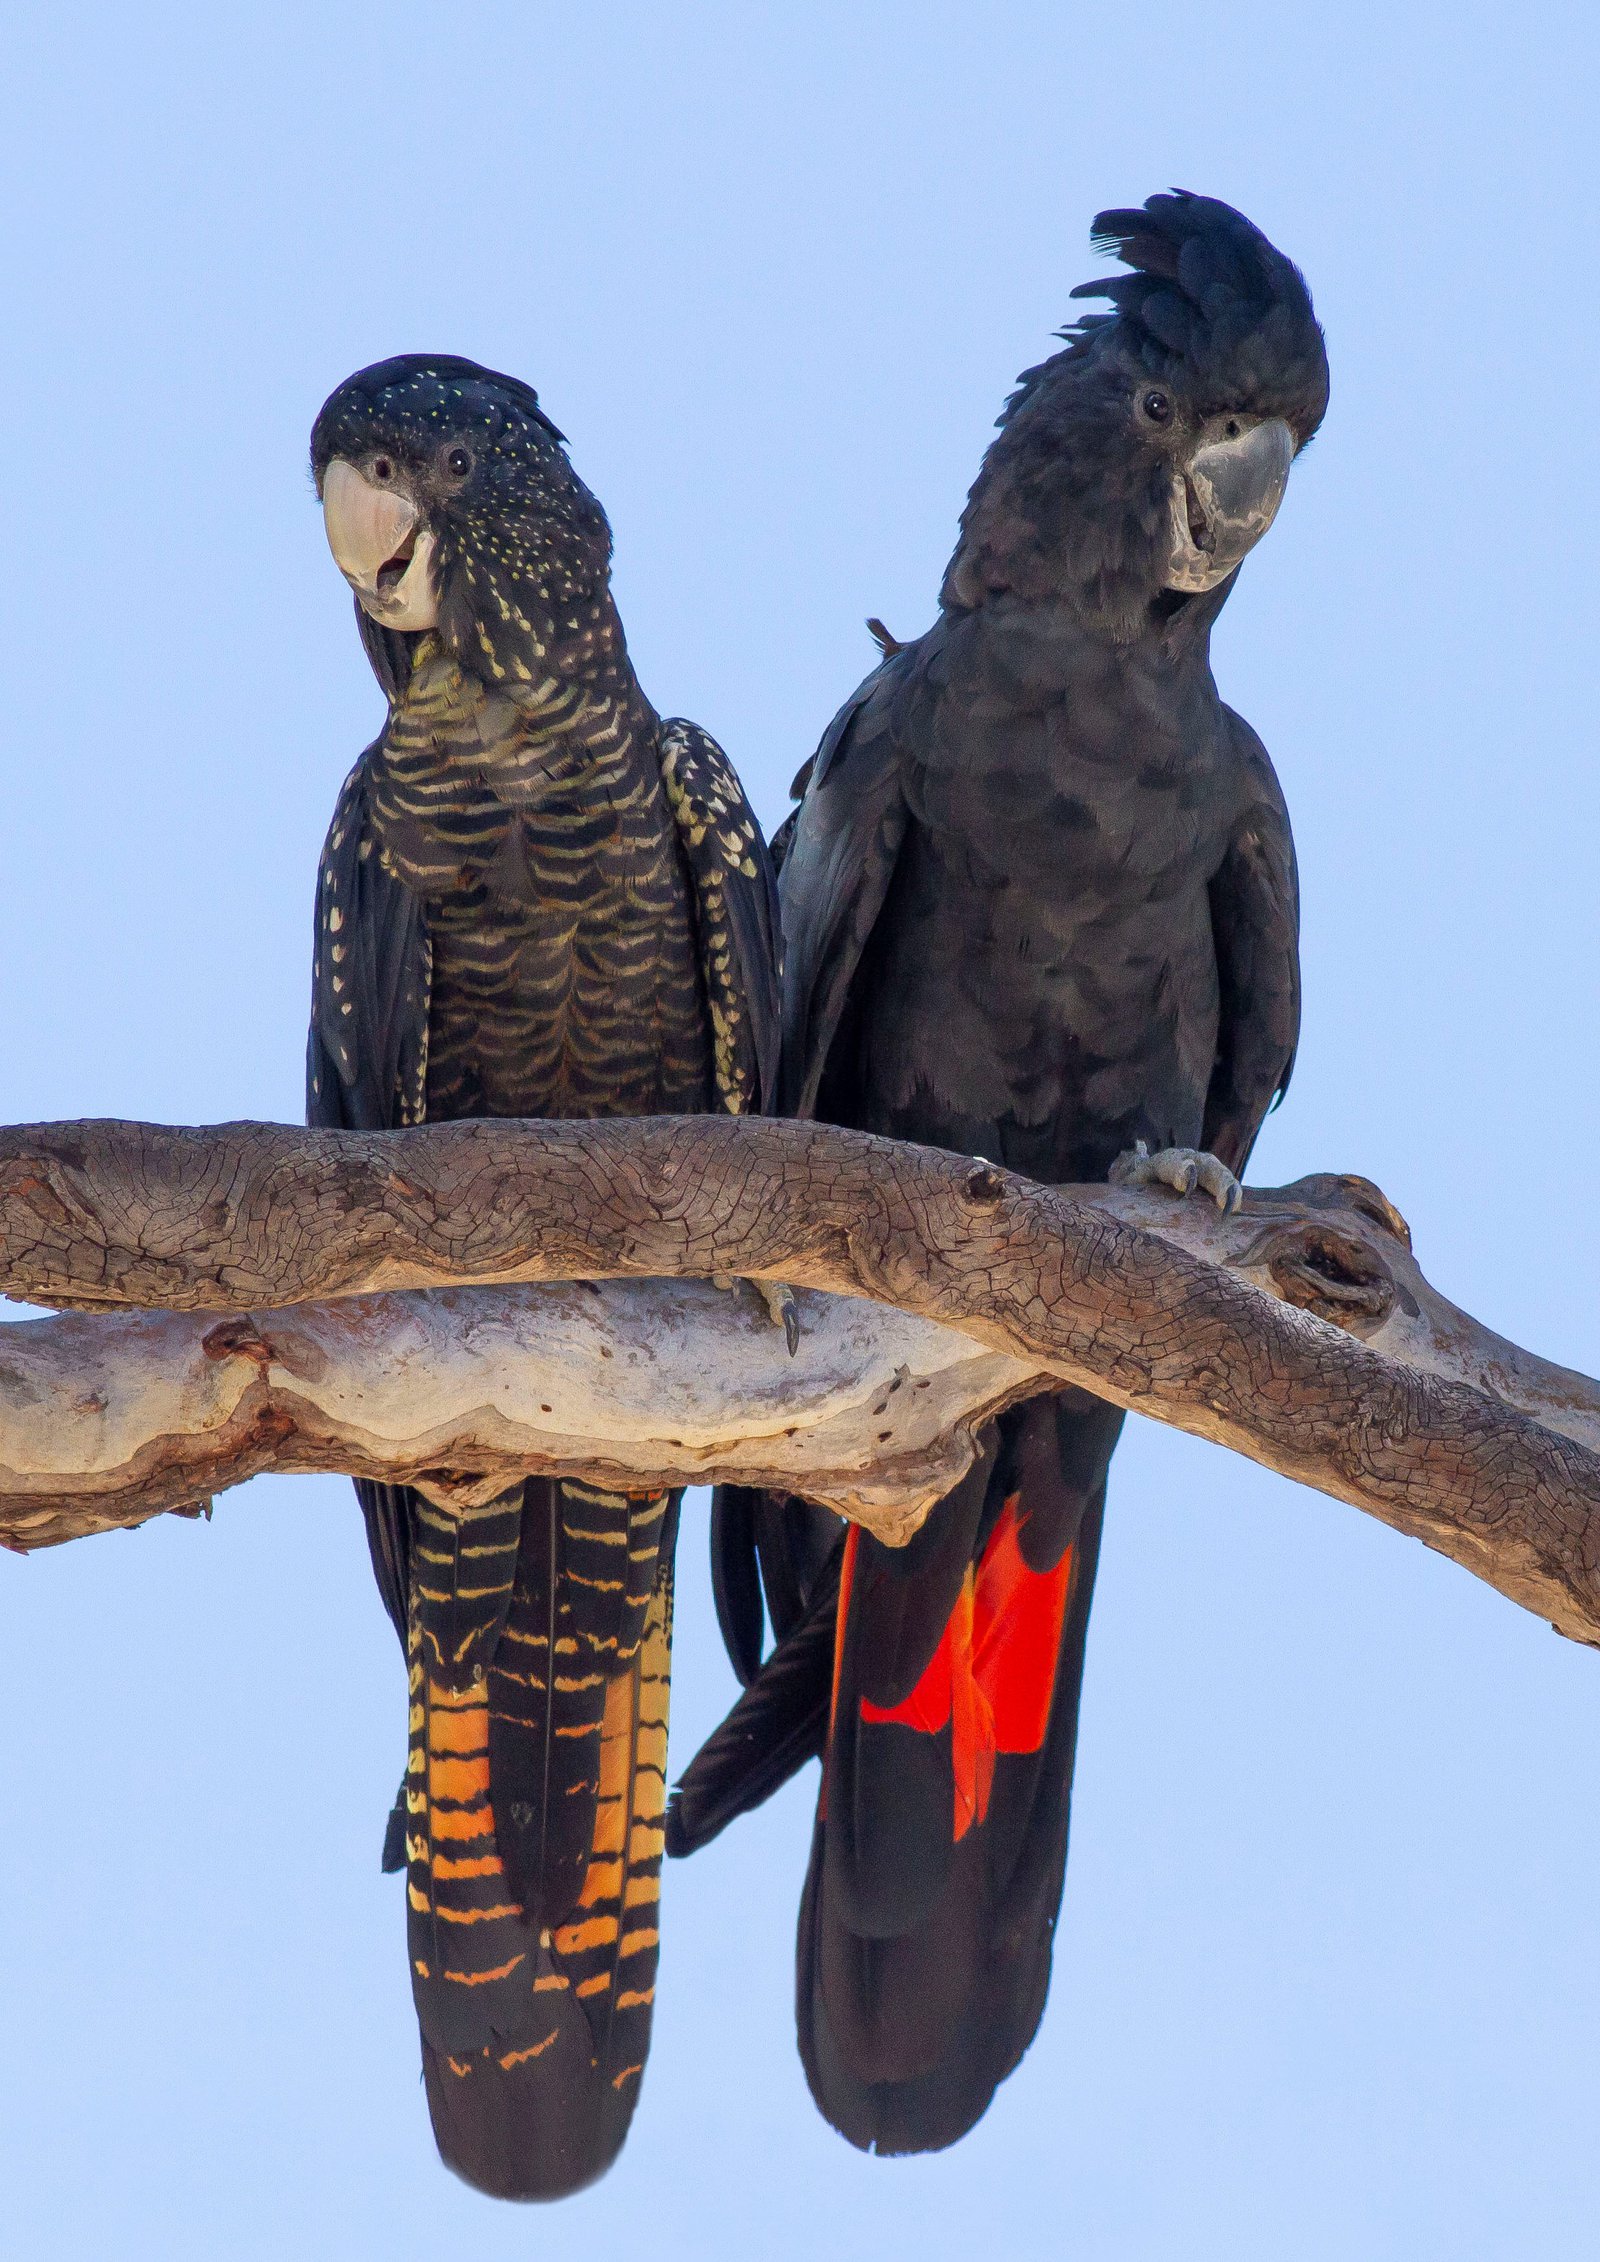 Hidden in plain sight: introducing the new subspecies of red-tailed black- cockatoo! - The Australian Museum Blog